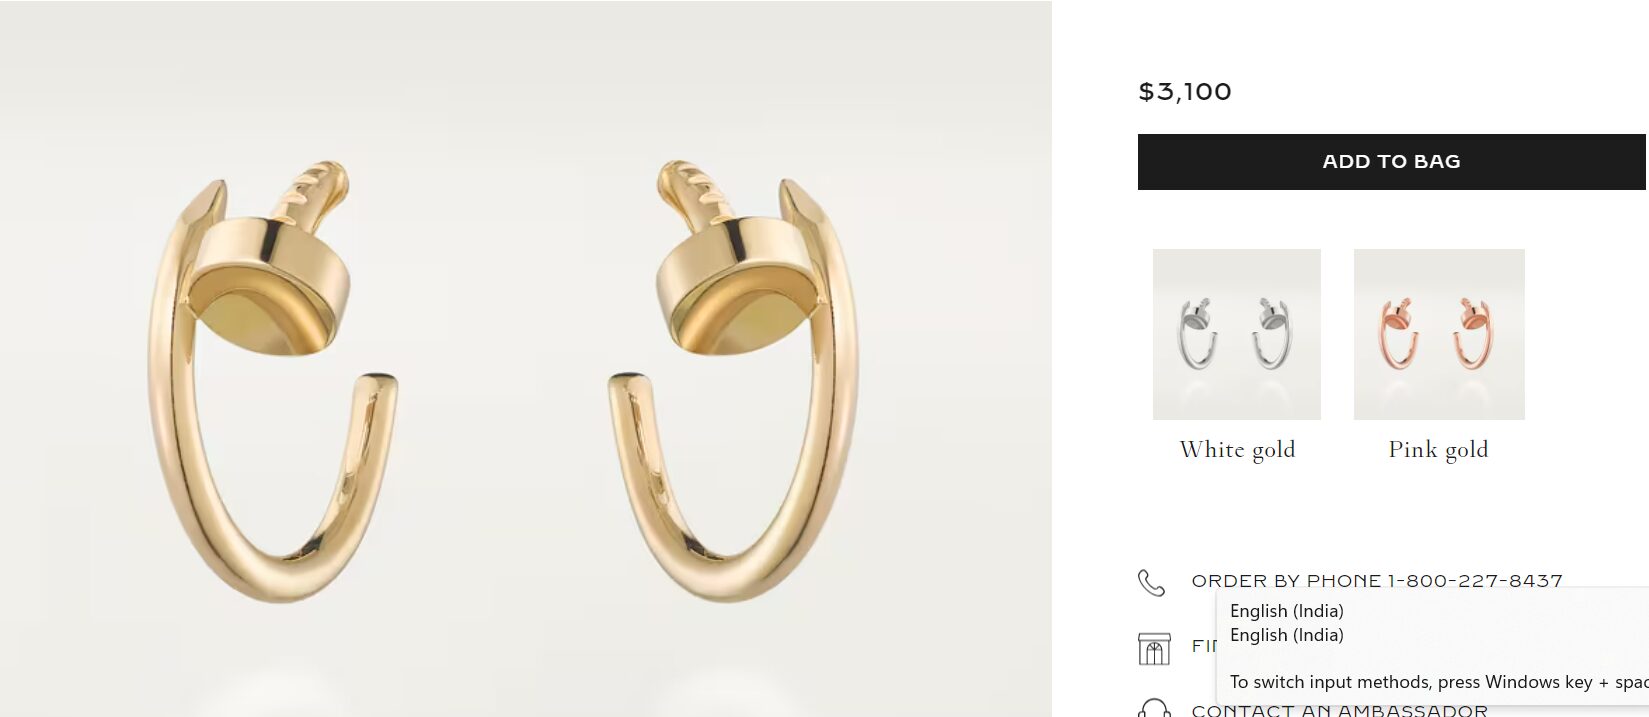 Price tag of gold earrings